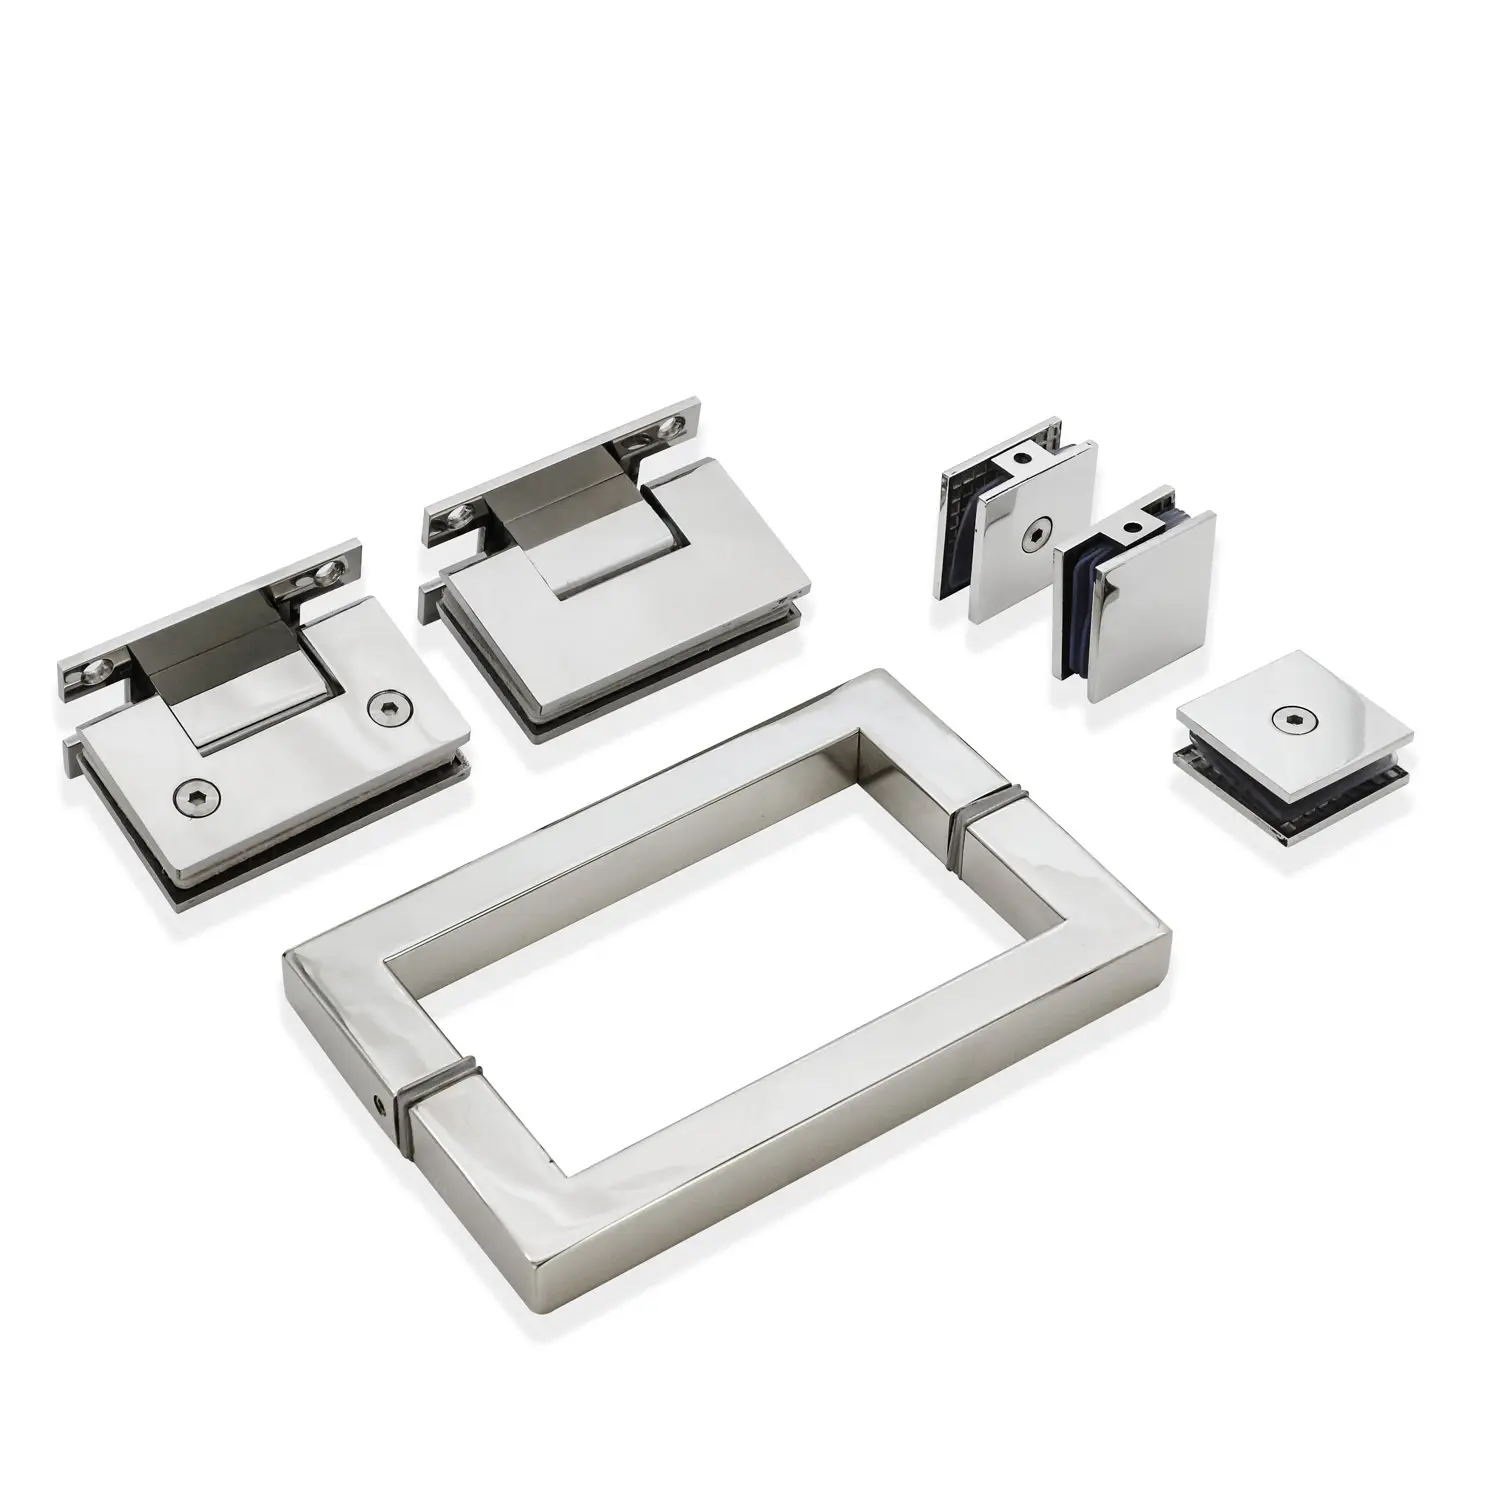 Whole set stainless steel shower hinge glass door square handle glass clamp kit